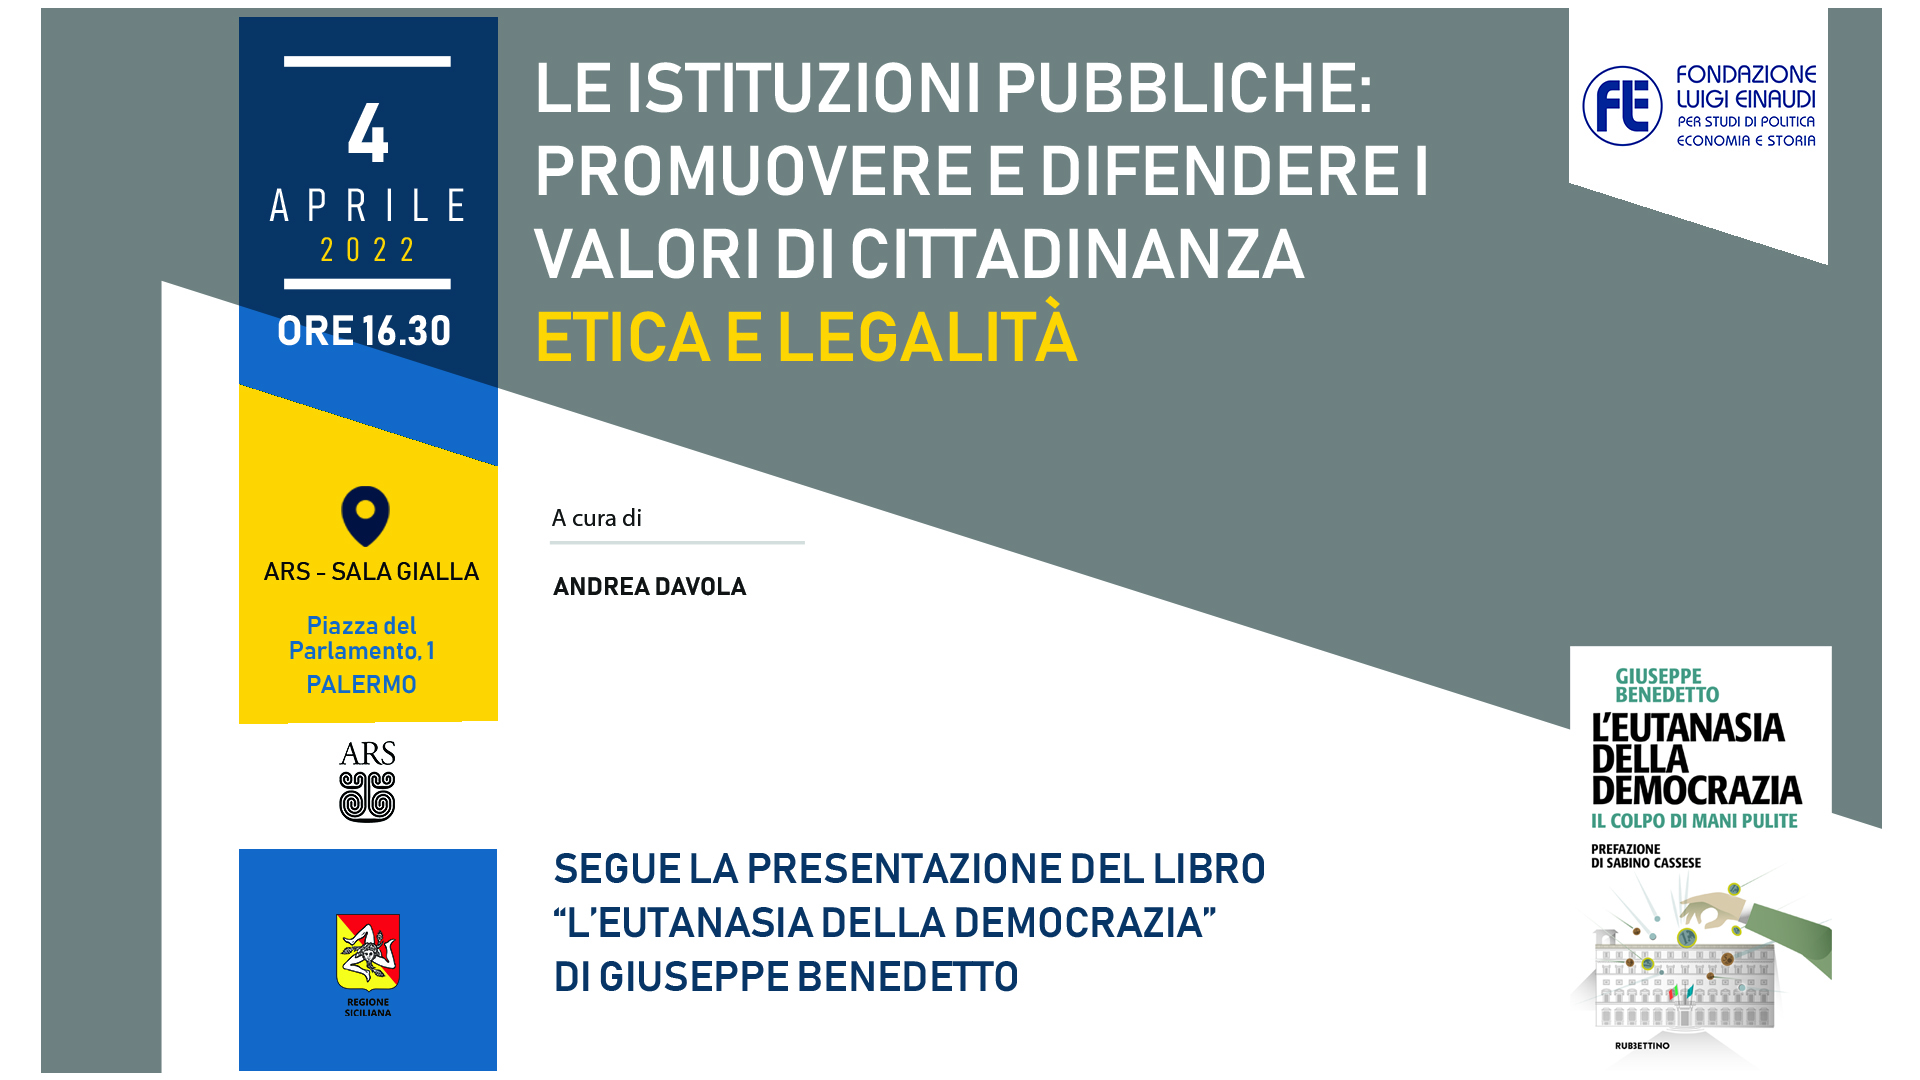 Public Institutions: Promoting and Defending Values of Citizenship – Ethic and Legality